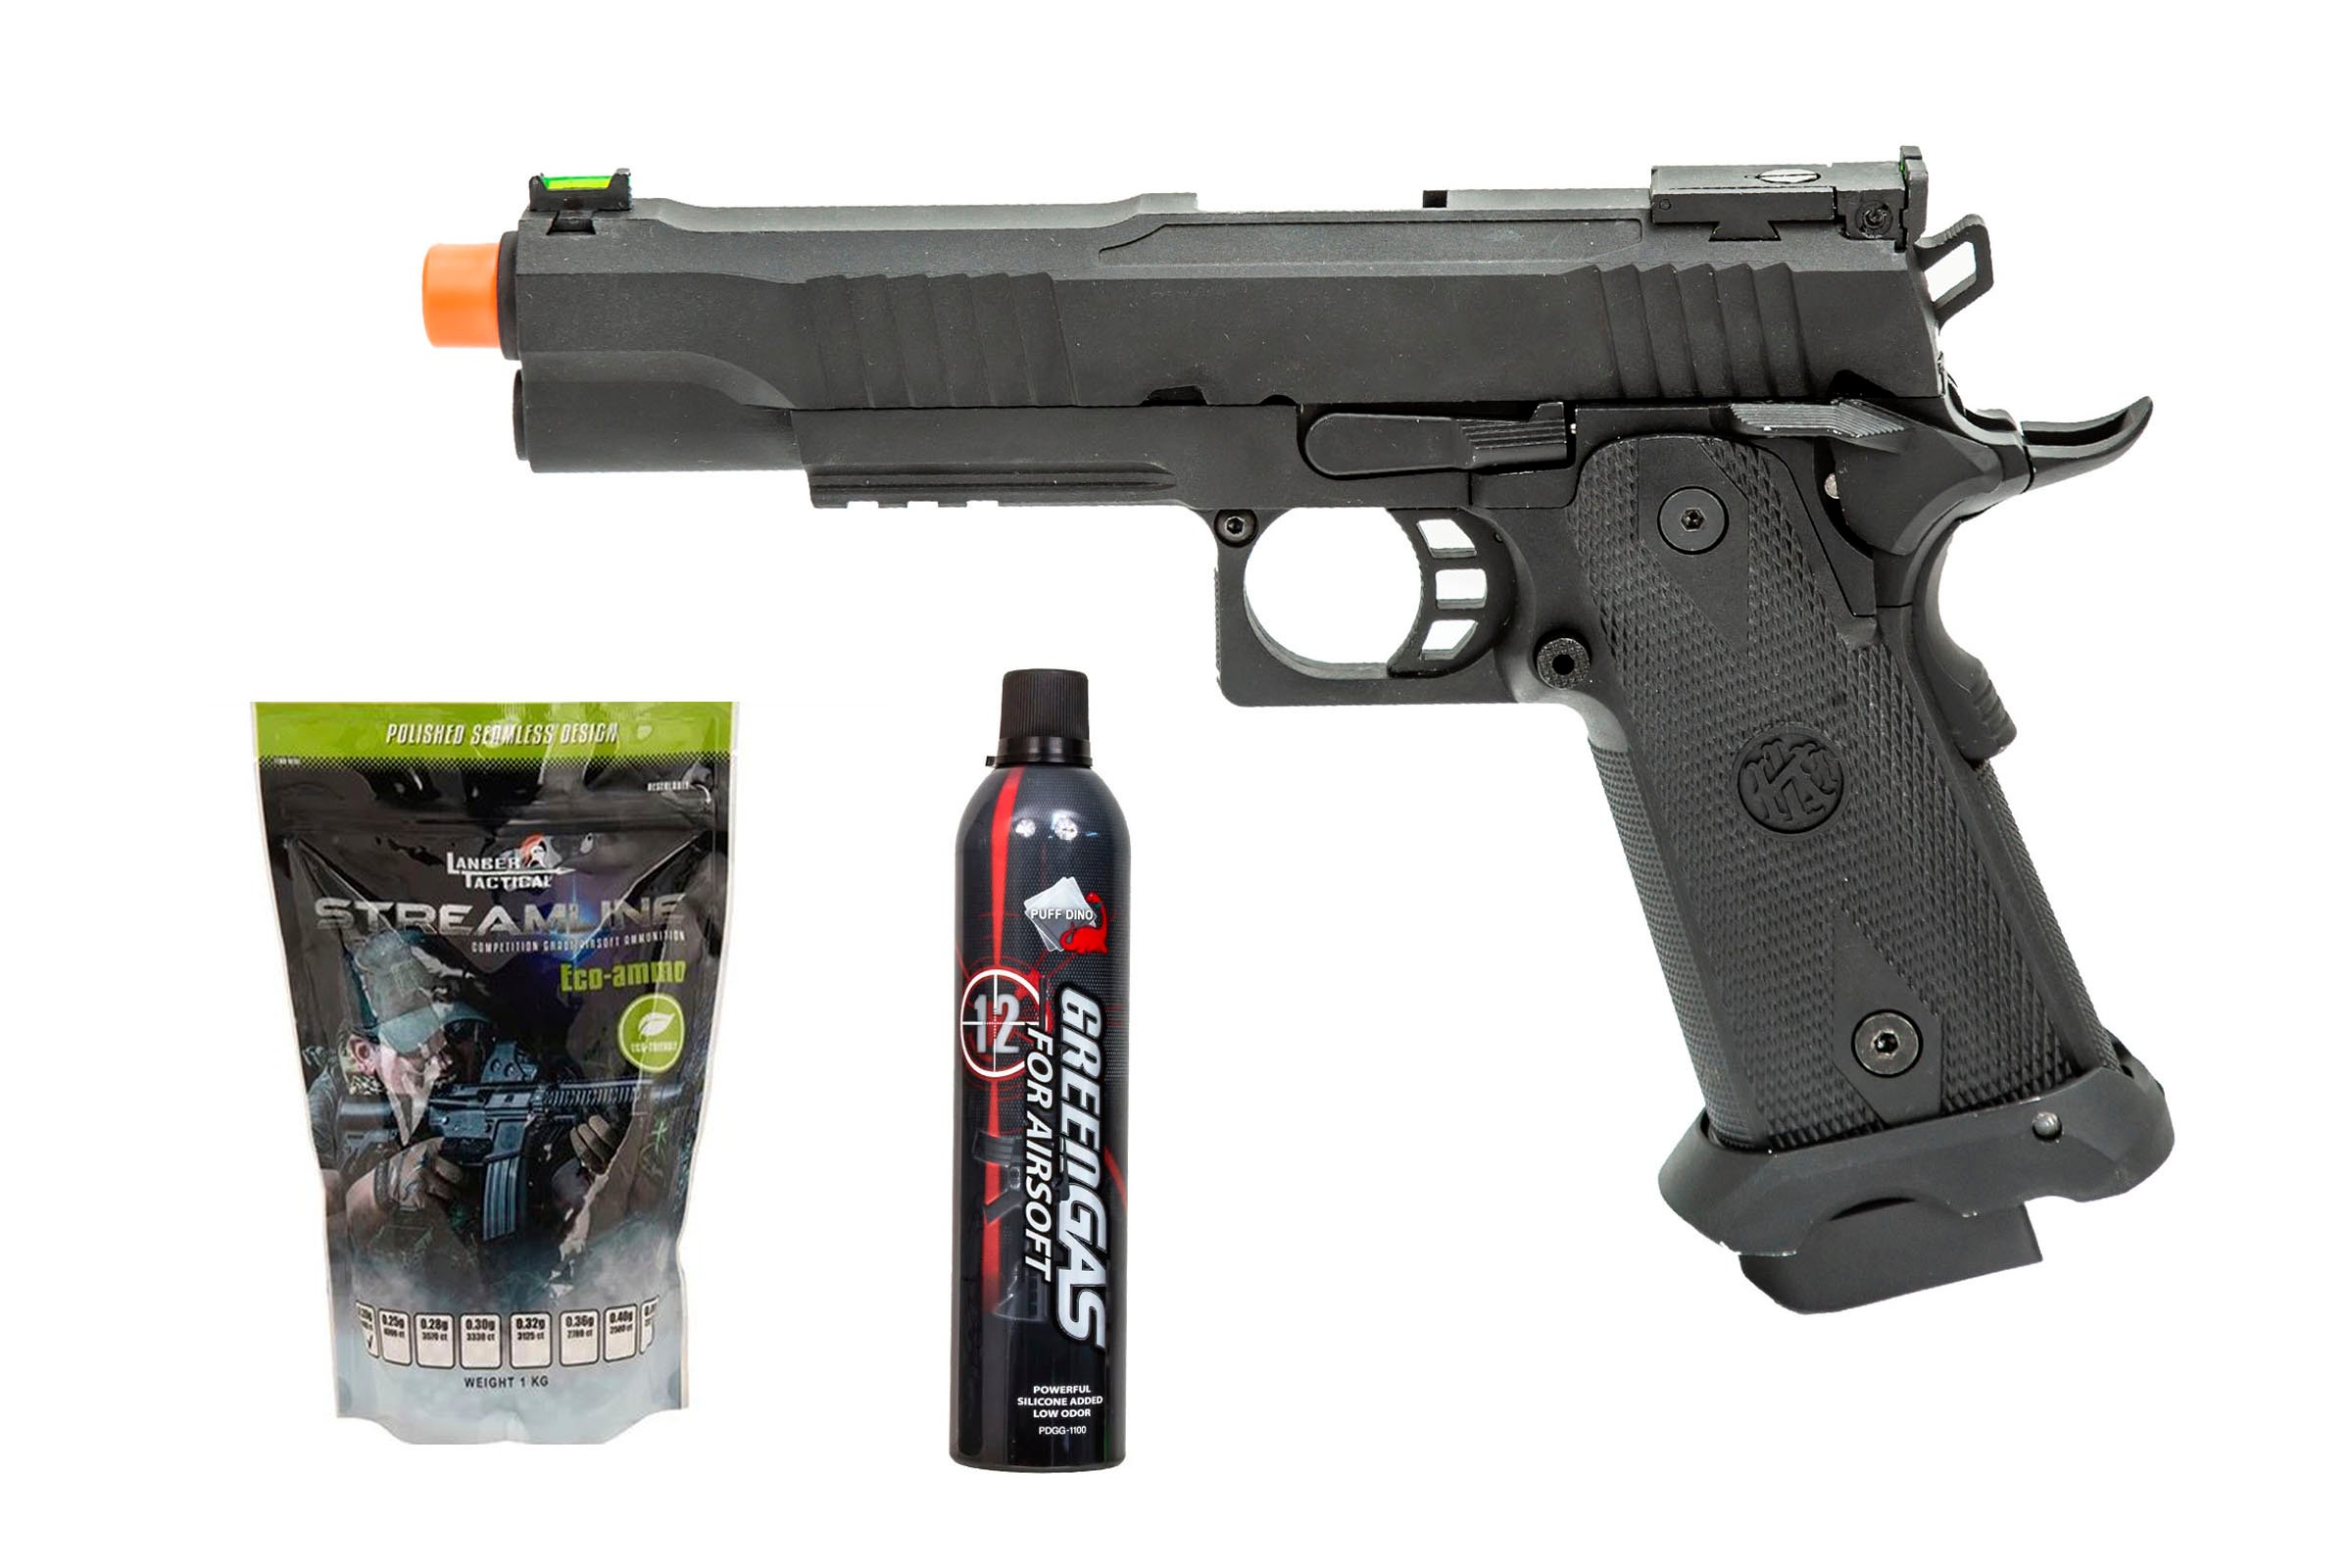 Gassed Up Player Package #39 ft. KLI Dual Power Hi-Capa 5.1 Gas Blowback  Airsoft Pistol (